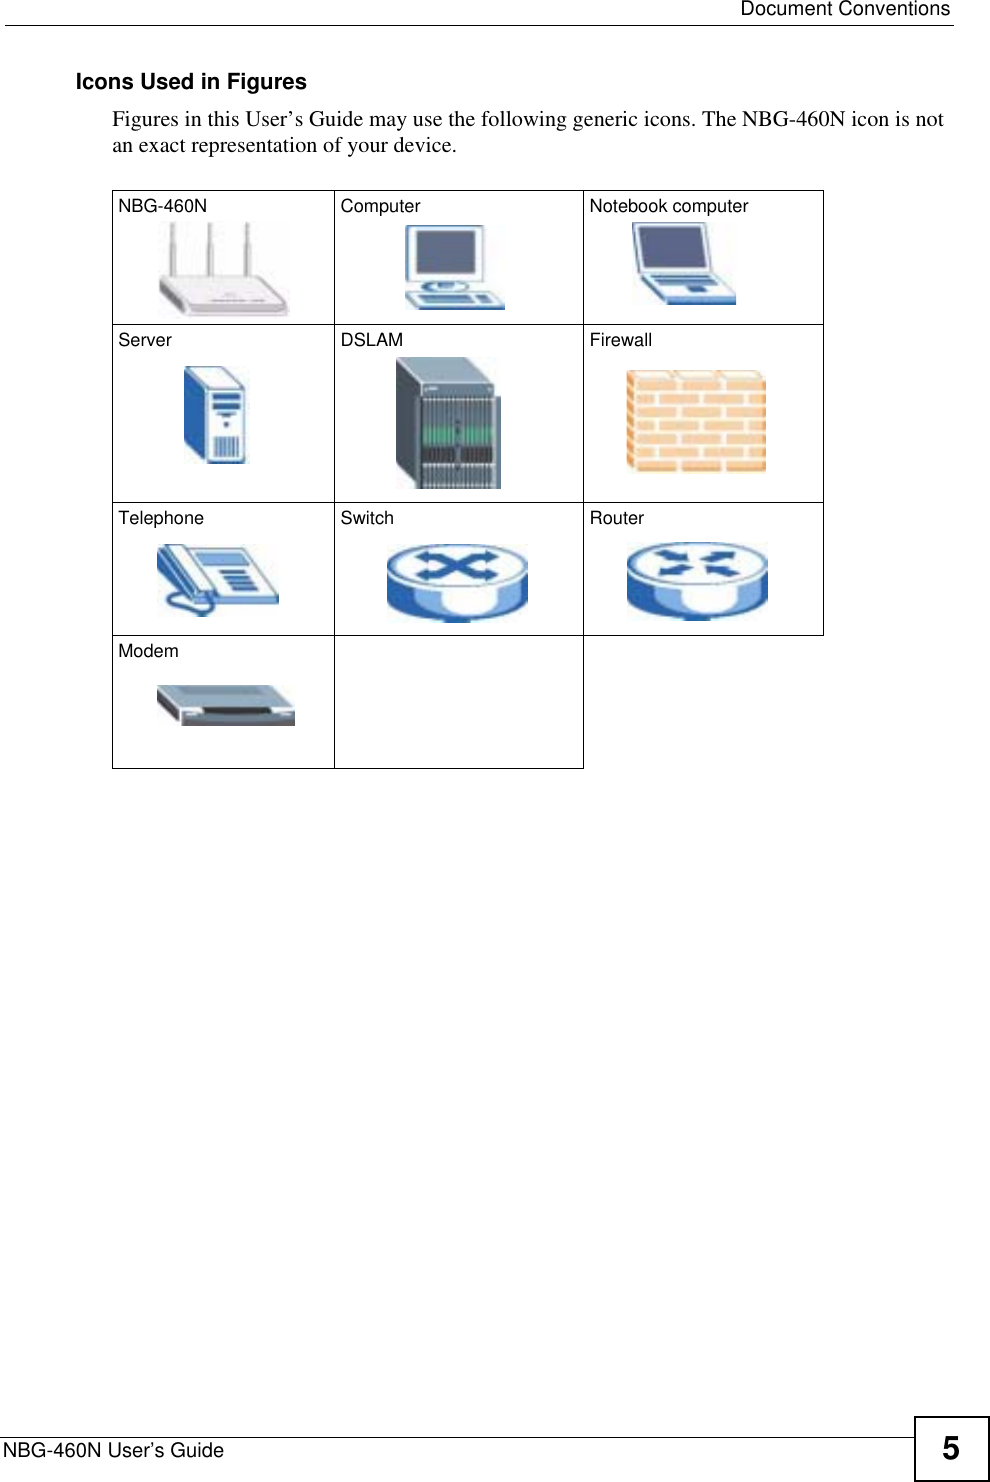  Document ConventionsNBG-460N User’s Guide 5Icons Used in FiguresFigures in this User’s Guide may use the following generic icons. The NBG-460N icon is not an exact representation of your device.NBG-460N Computer Notebook computerServer DSLAM FirewallTelephone Switch RouterModem